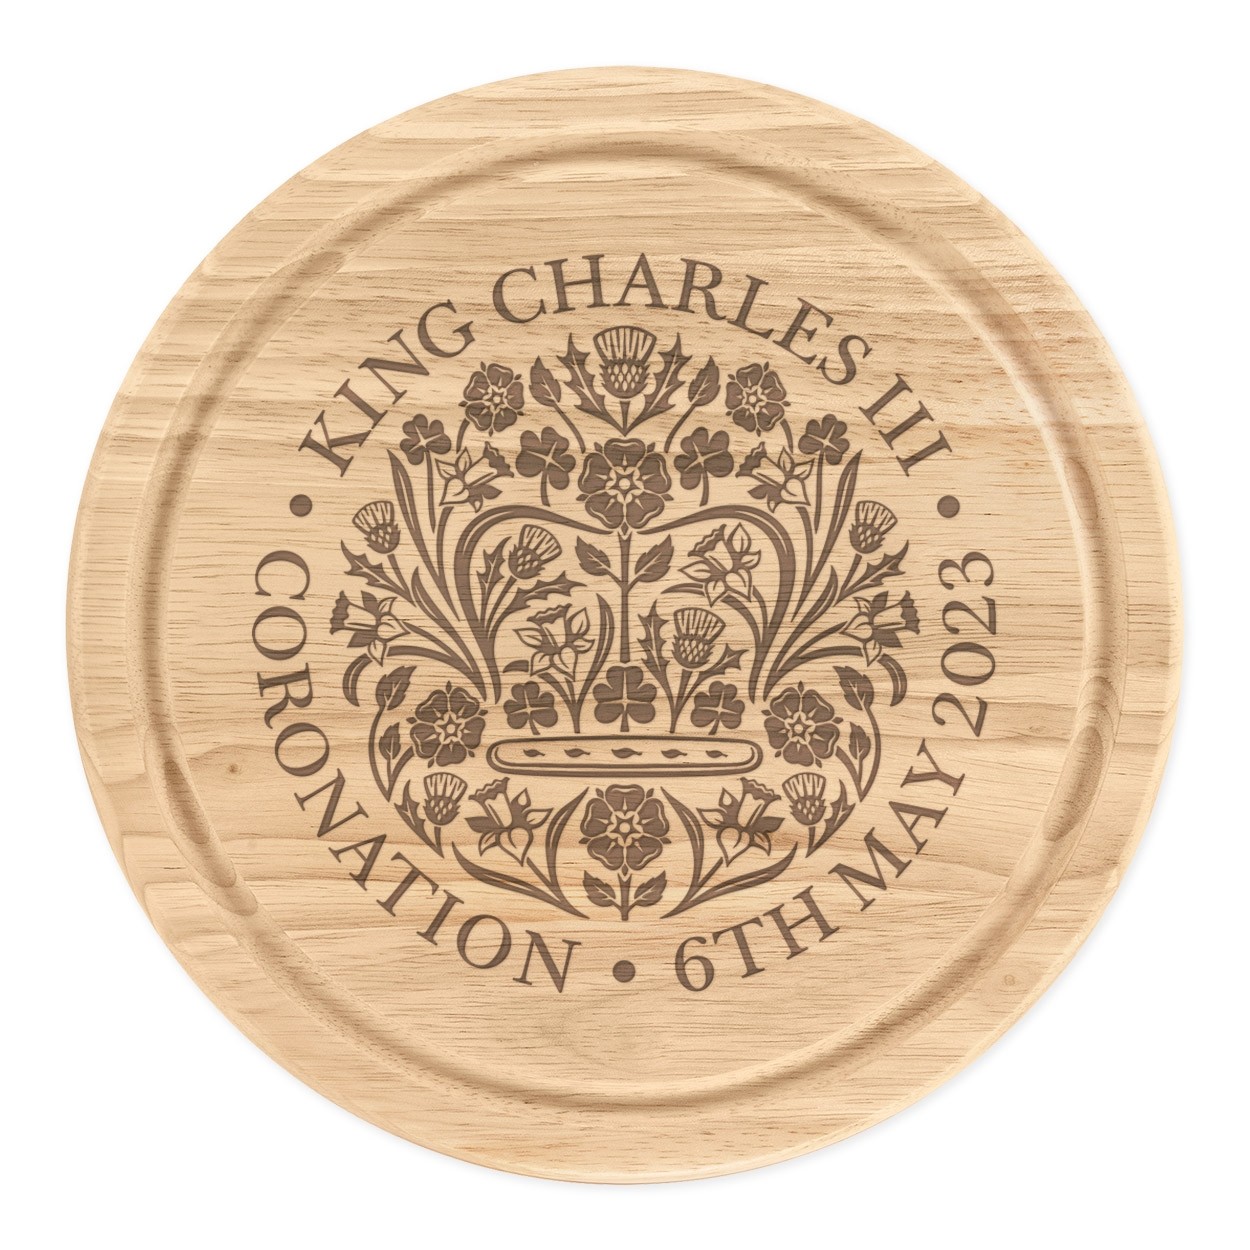 Coronation Emblem King Charles III Wooden Chopping Board Round 25cm Cake Cheese King's Coronation Commemorative Souvenir Gift 6th May 2023